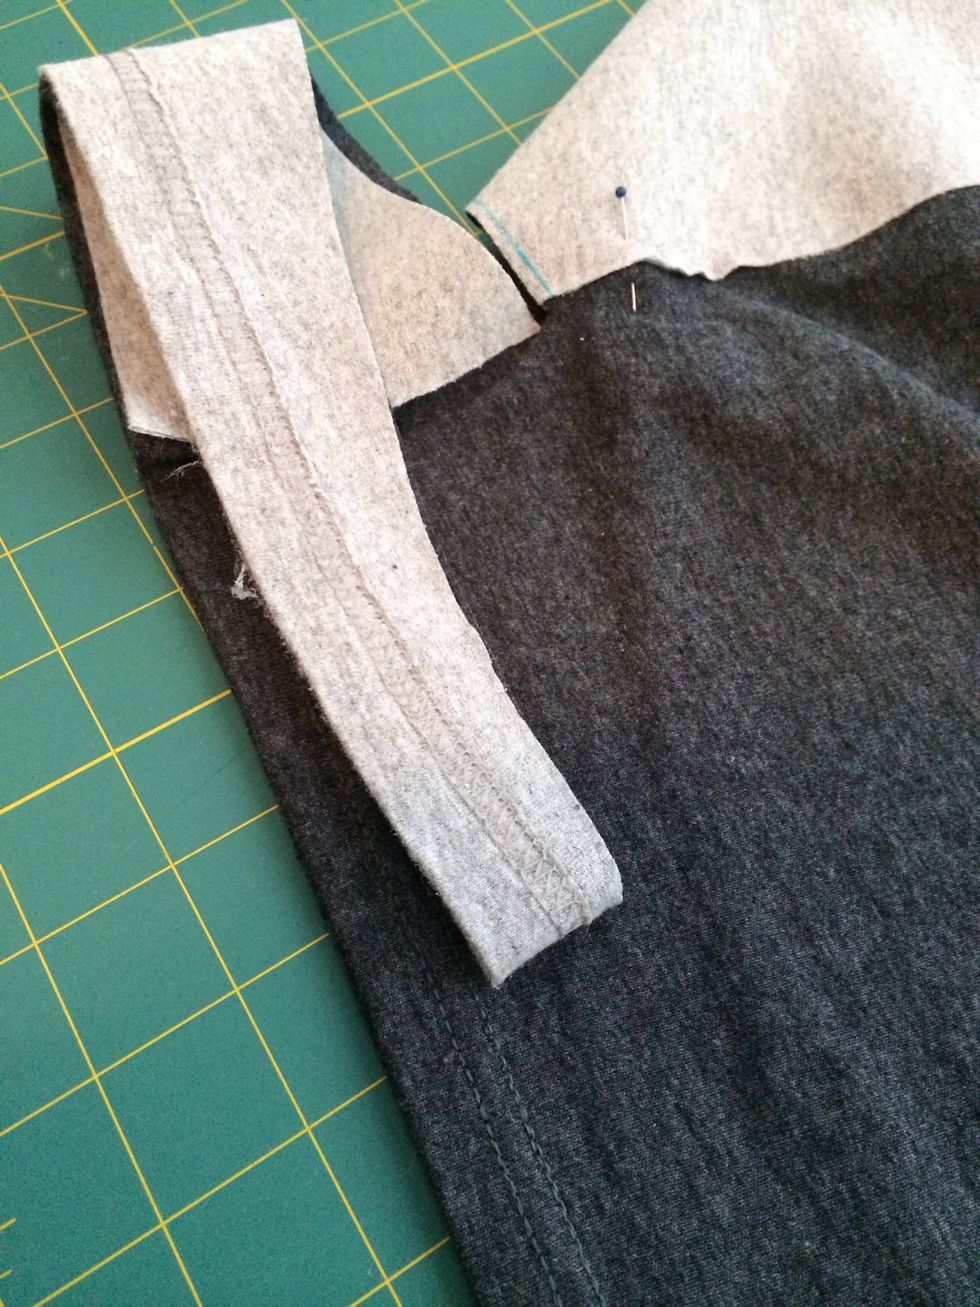 How to make a (no sew) totoro t-shirt - B+C Guides